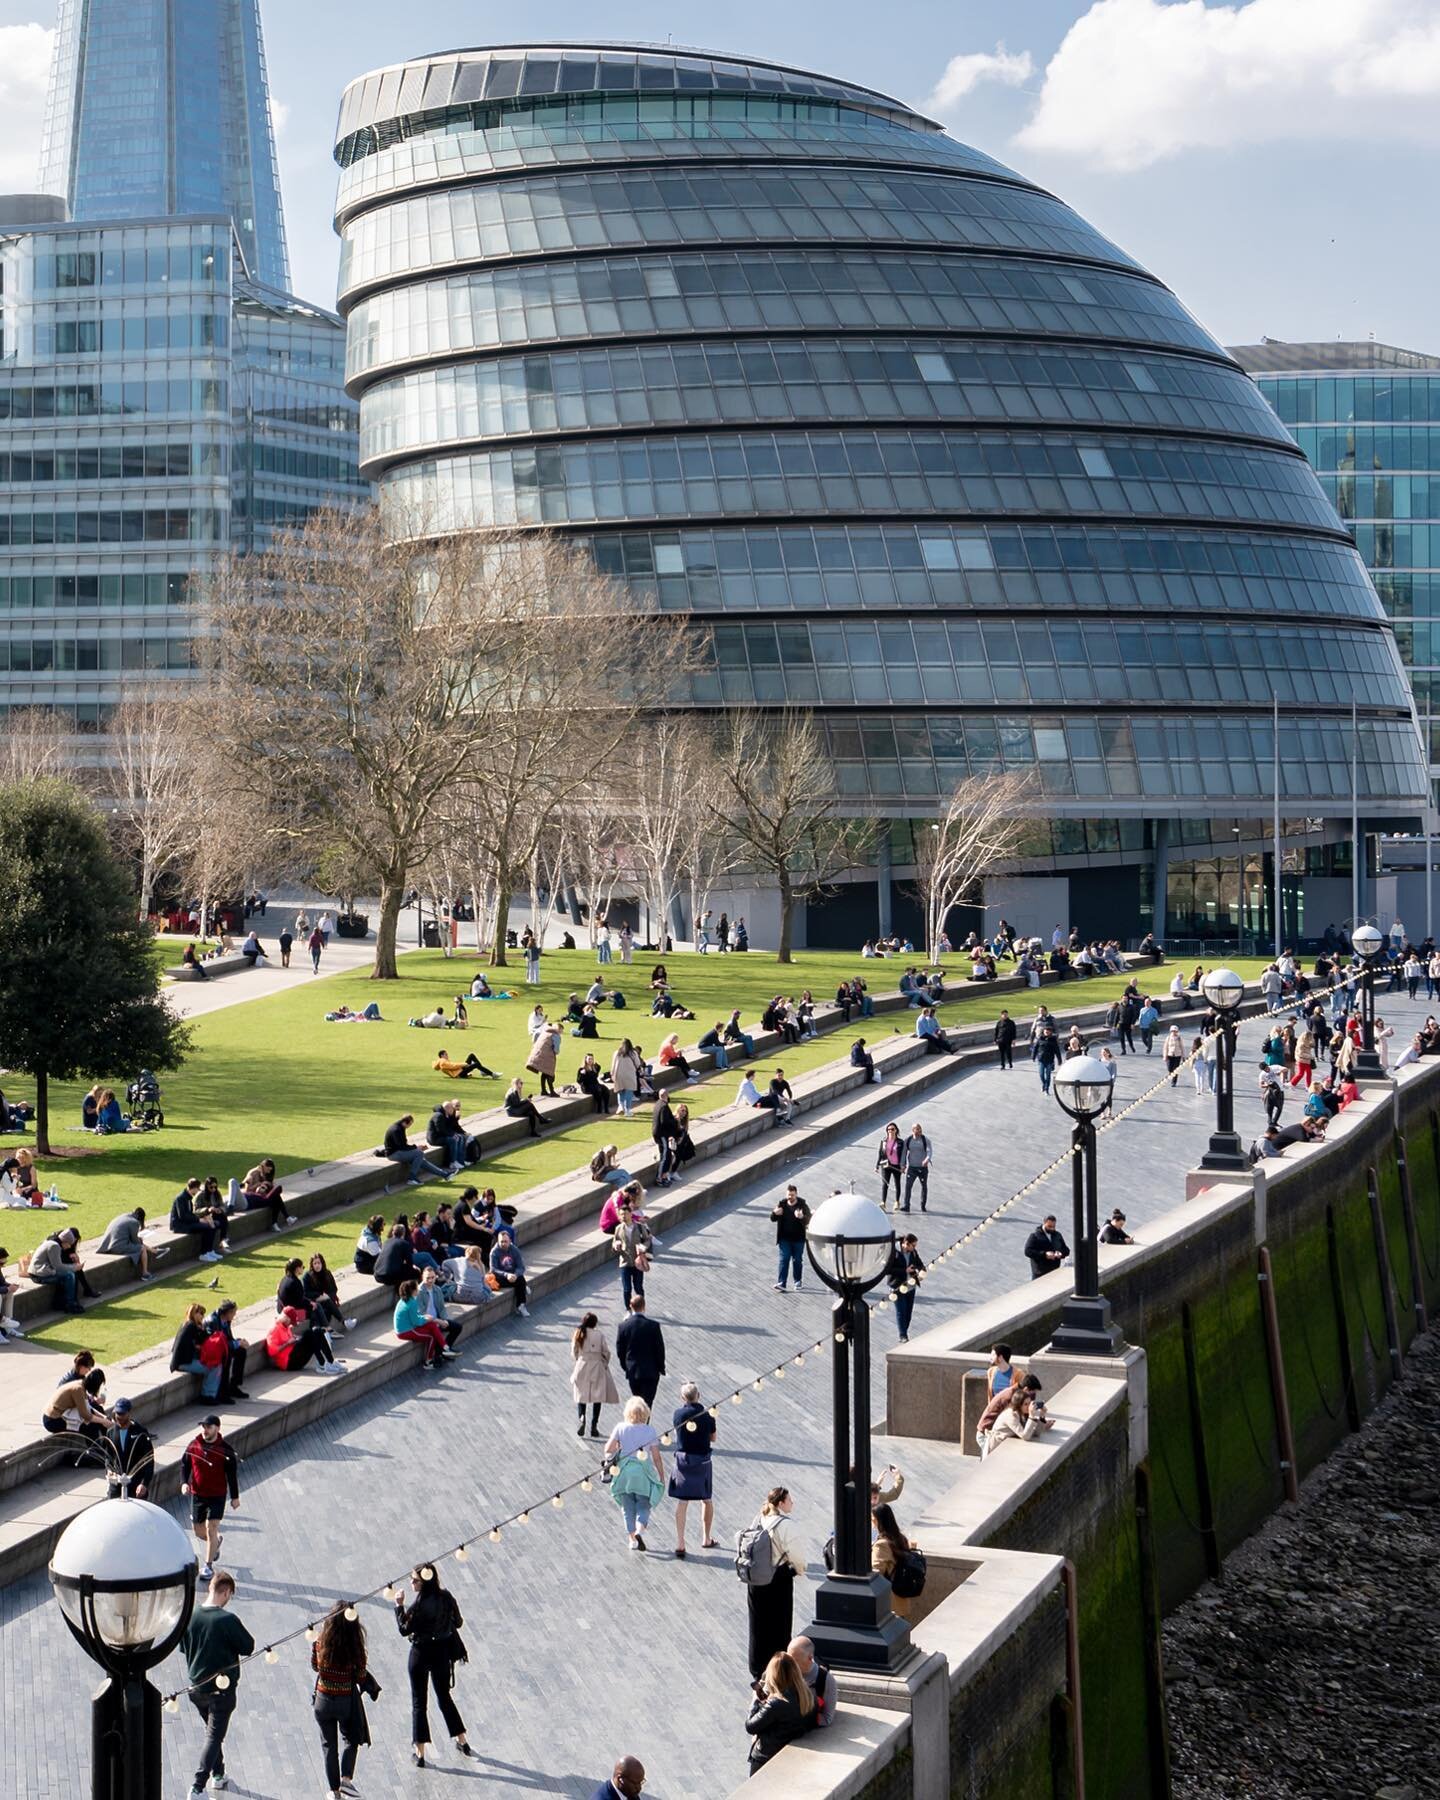 From unmissable events and iconic attractions to top-notch restaurants and world-famous shopping streets, there are so many amazing things to do in London.

Take a look at the latest coronavirus guidance and start planning your trip to London.&nbsp;
